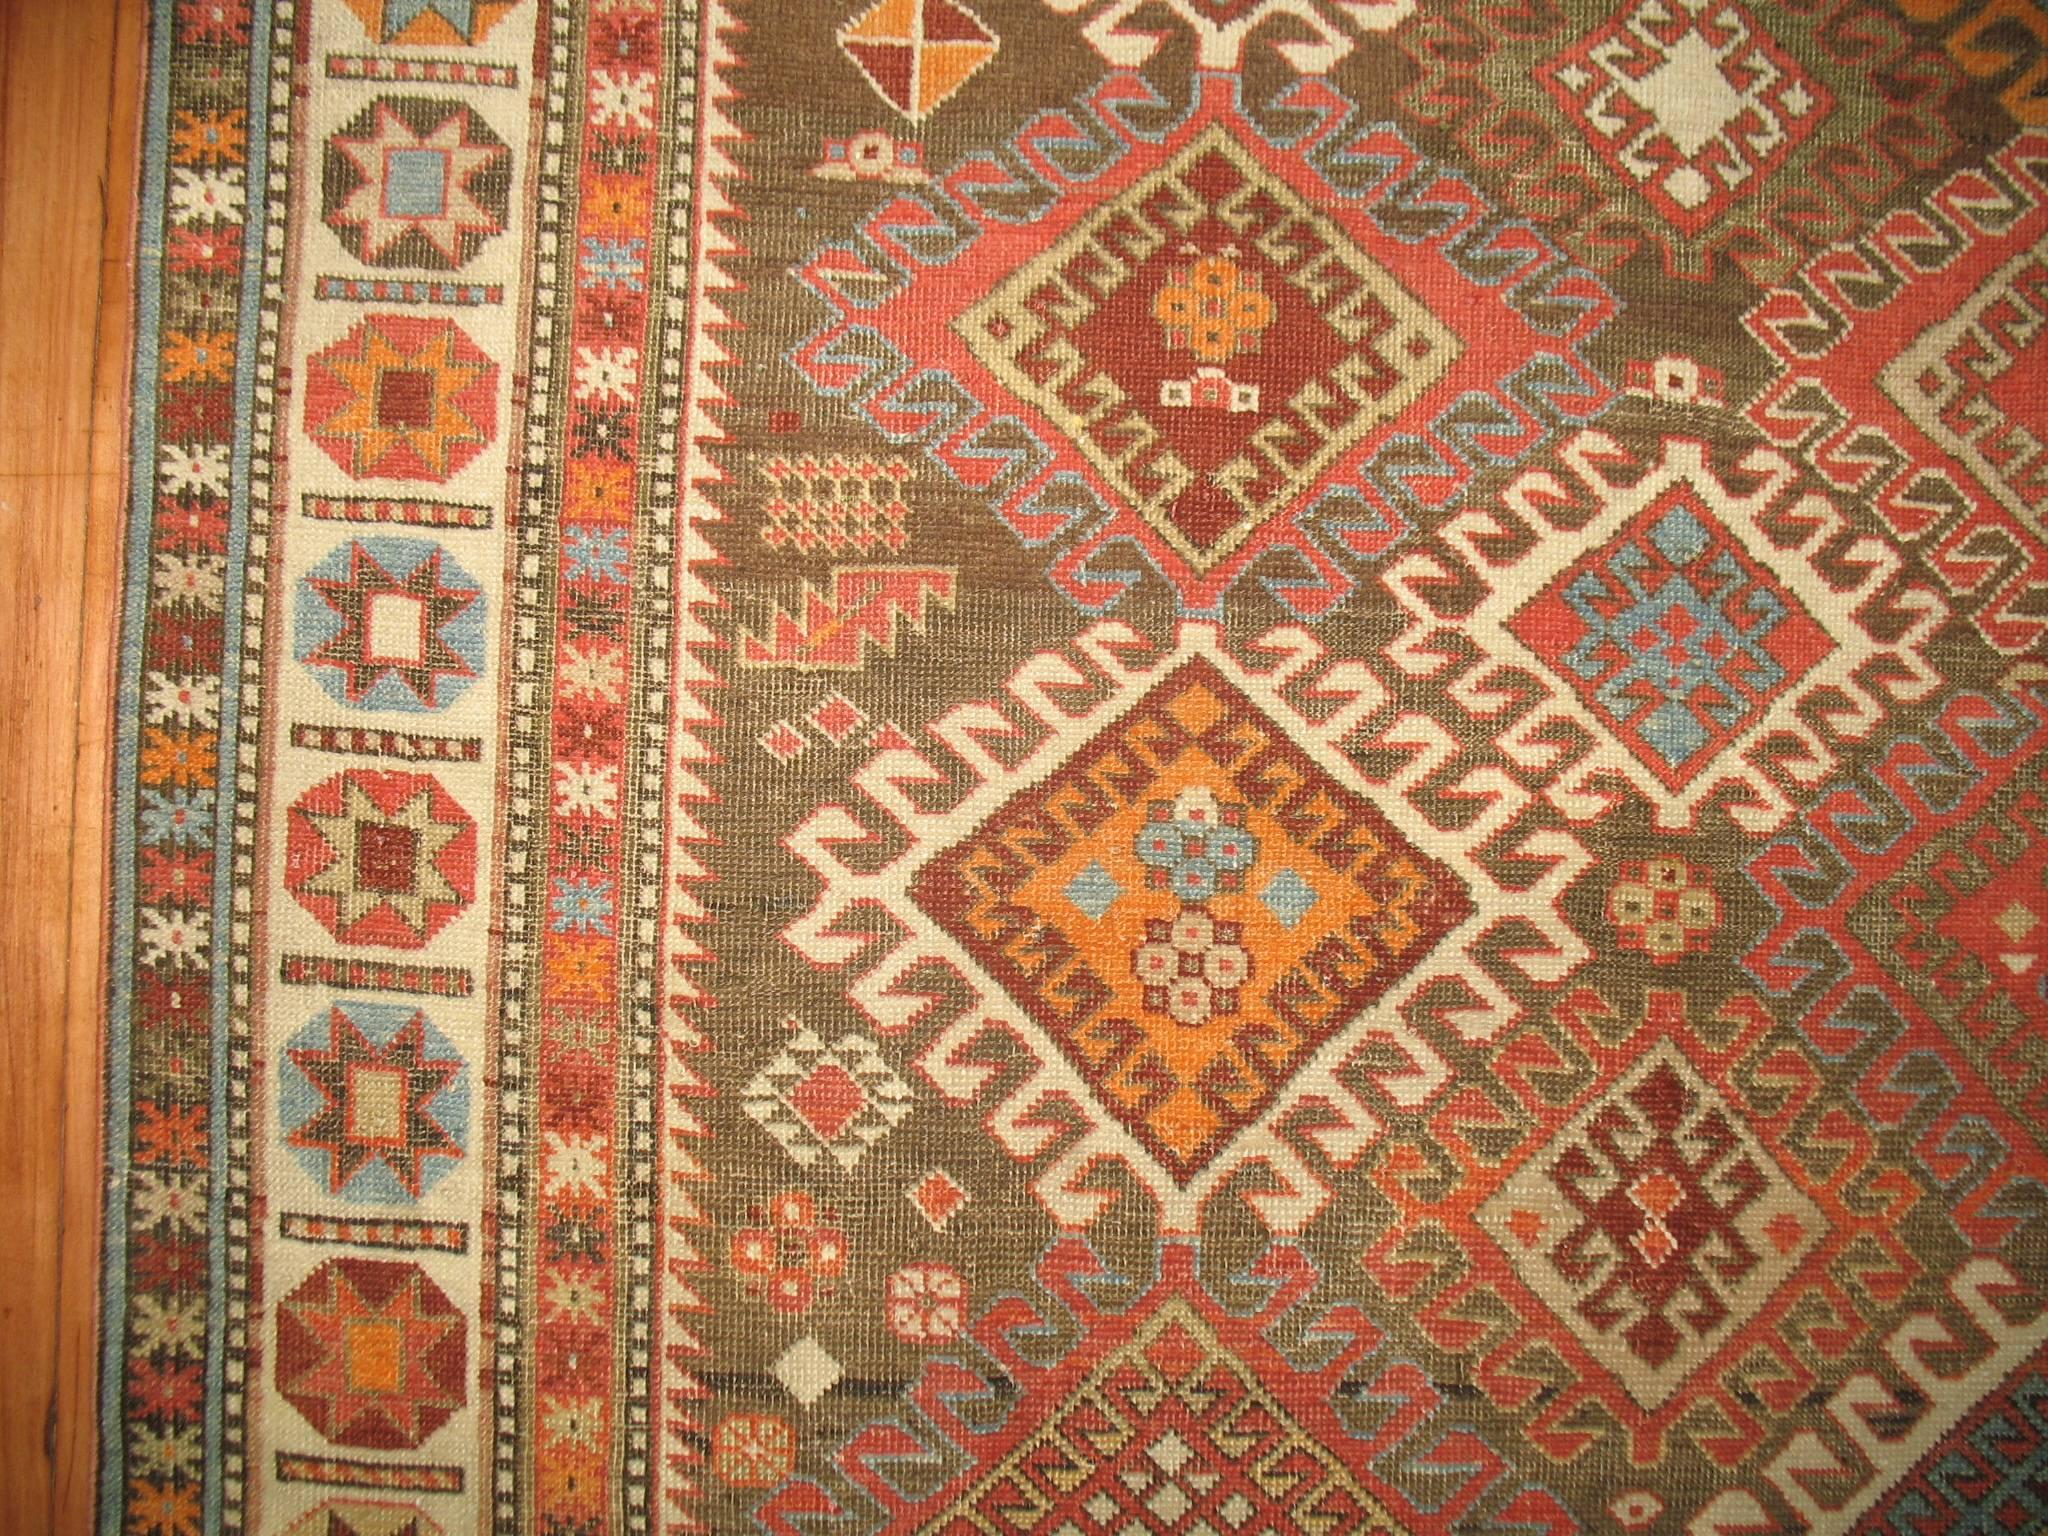 An early 20th century Caucasian Shirvan rug with an abrashed navy and brown field with accents in orange, lavender and blues.
Antique Caucasian Shirvan rugs offer original geometric ornamentation with a great graphic impact. As in so many of the